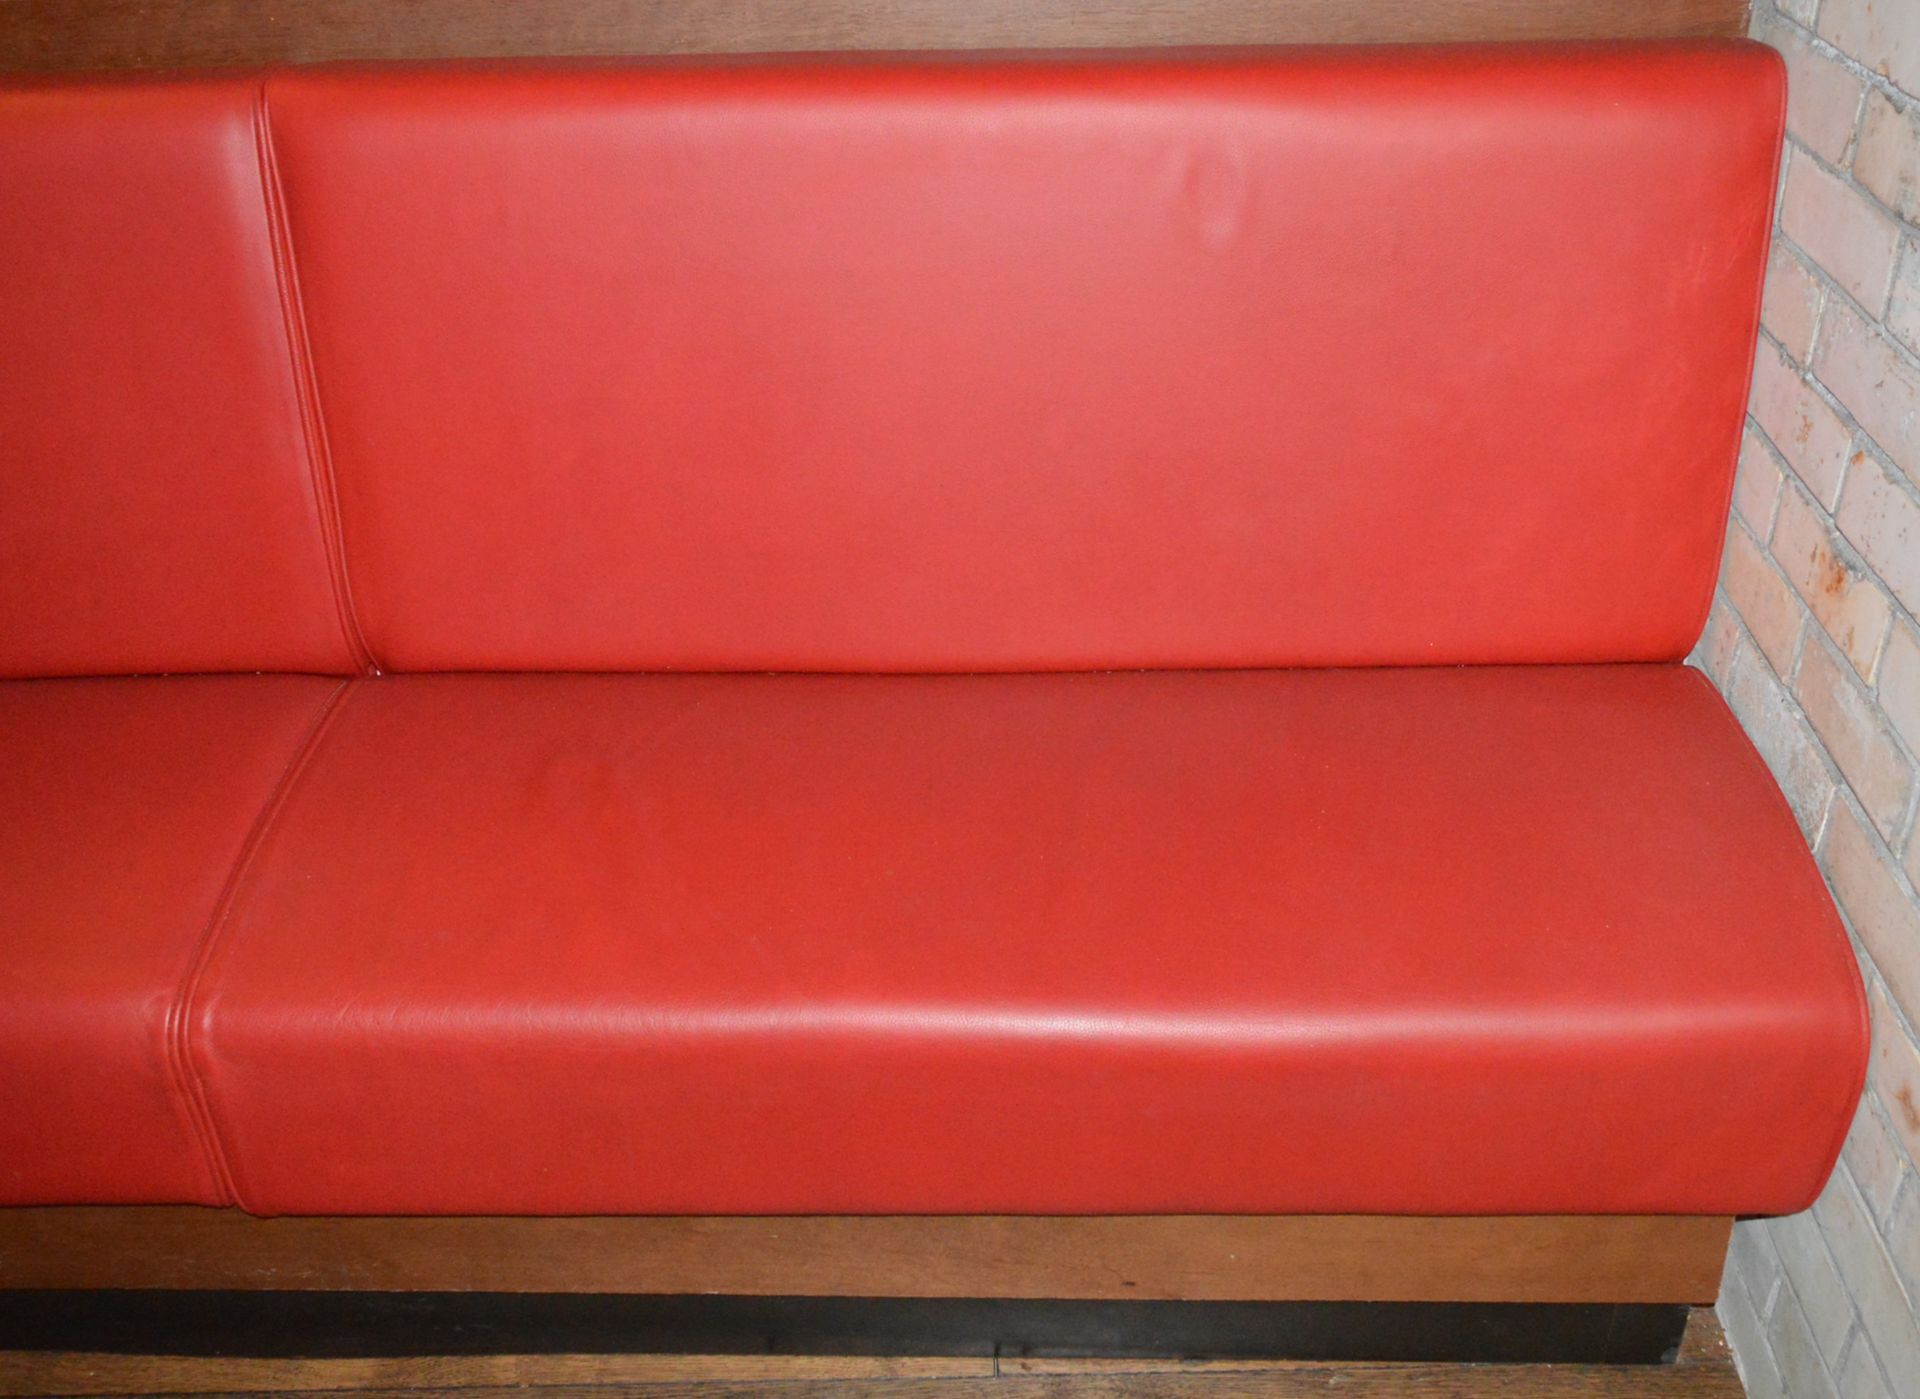 1 x High Back Seating Bench Upholstered in Red Leather With Oak Base and Surround - Image 3 of 5